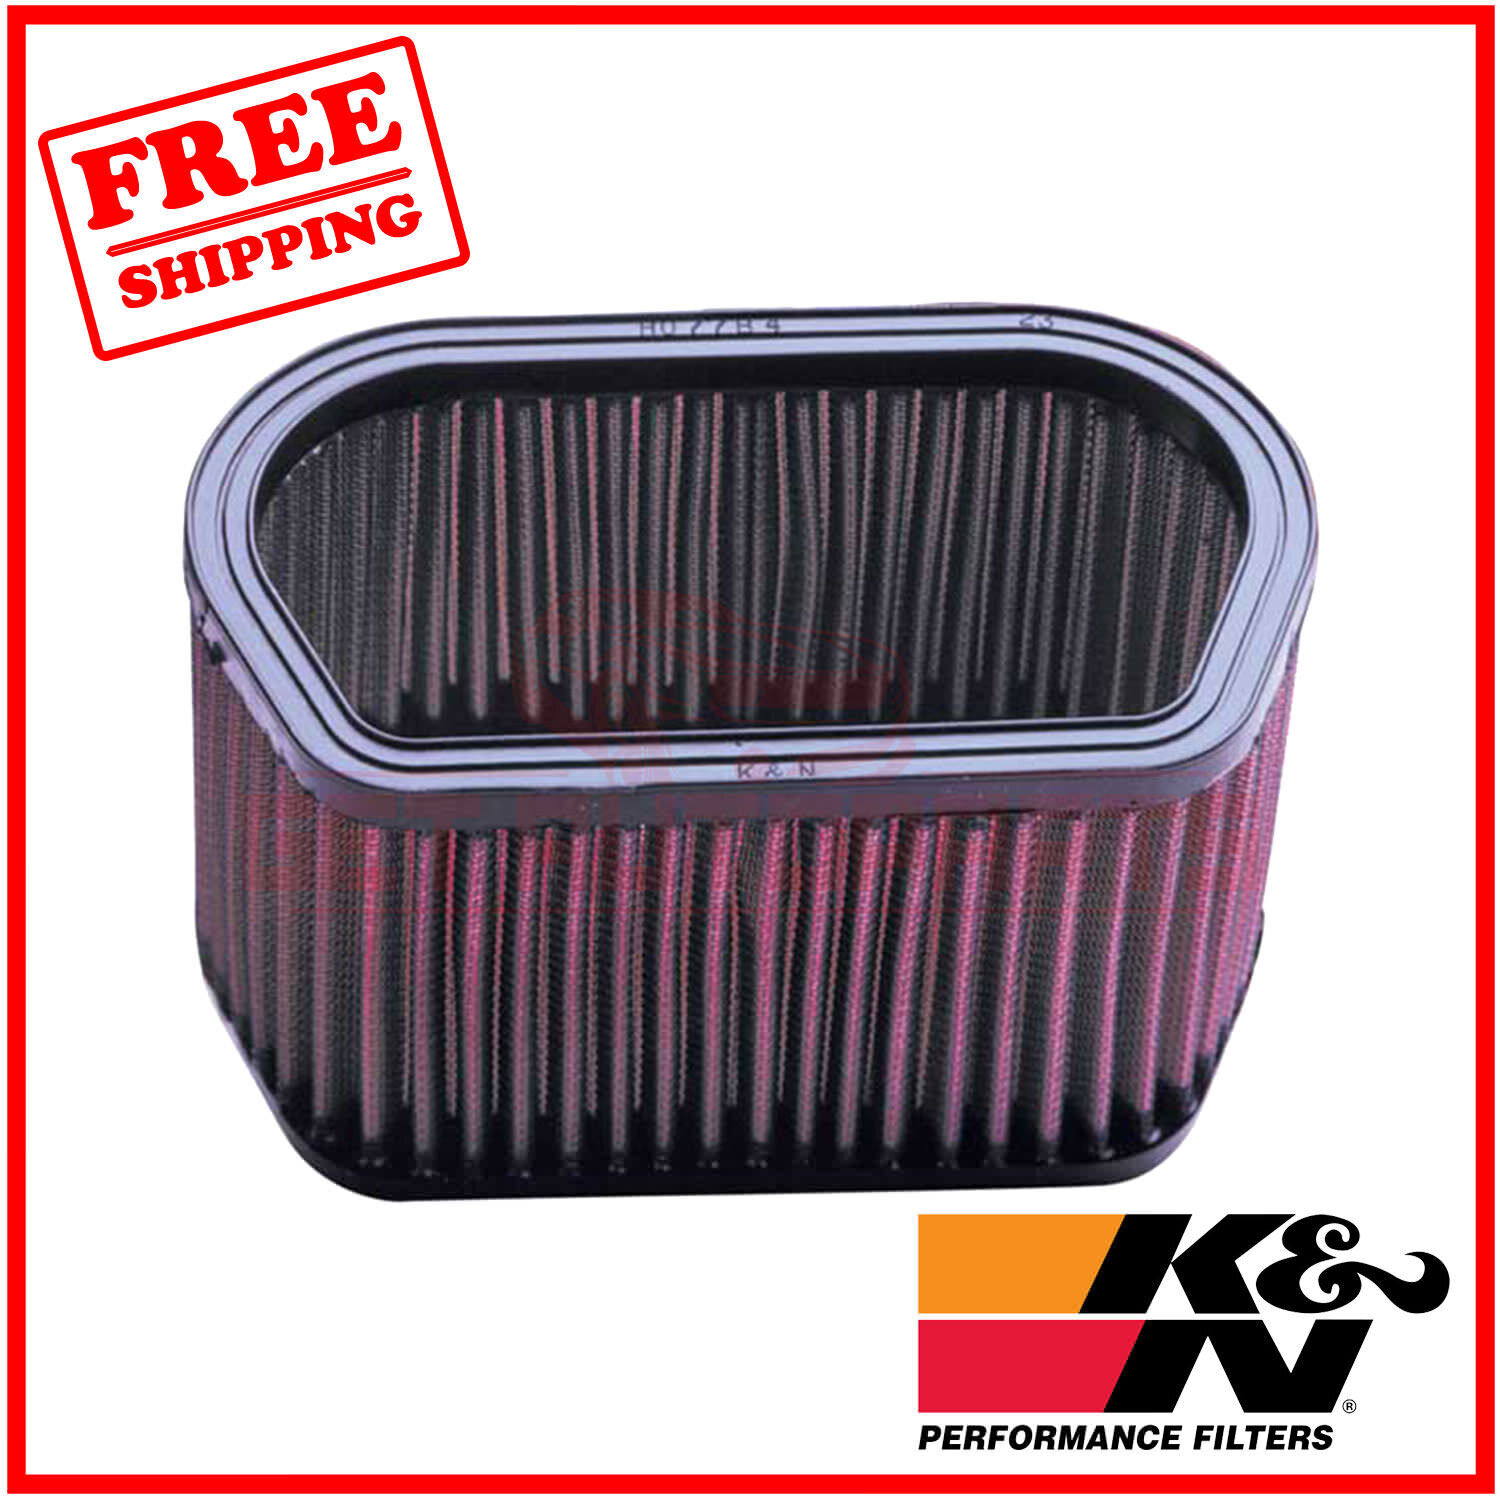 K&N Replacement Air Filter for Yamaha YZF-R1 1998-2001